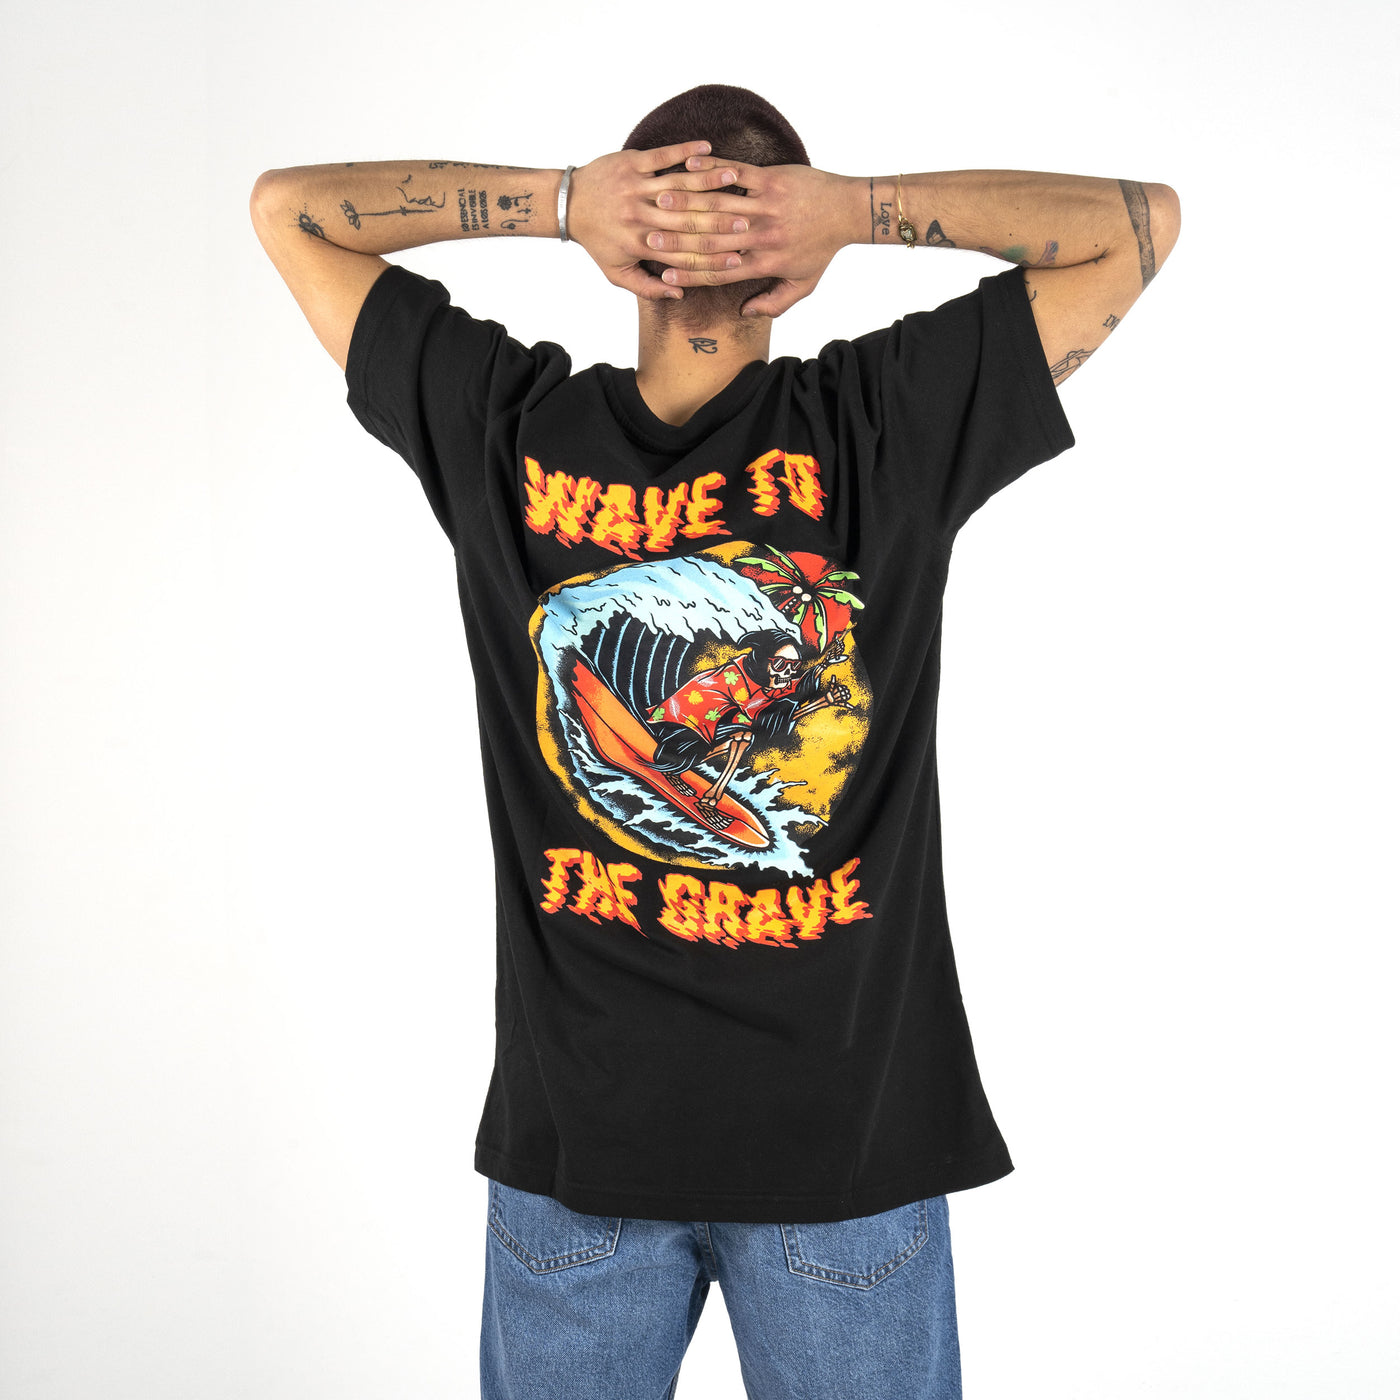 Wave to the Grave - T-Shirt